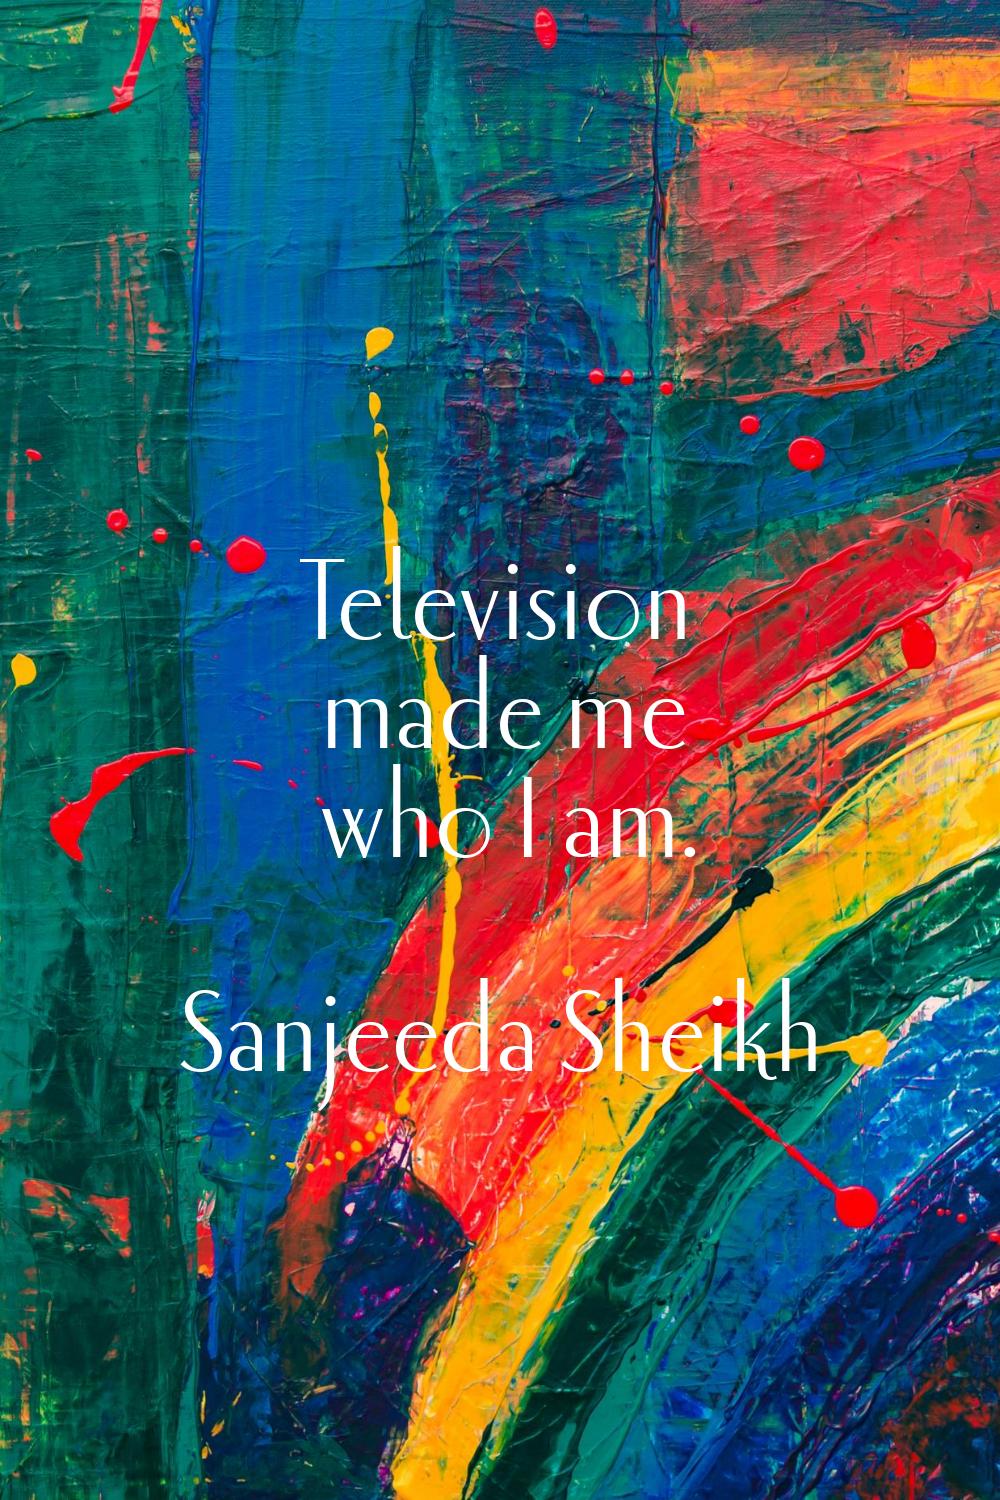 Television made me who I am.